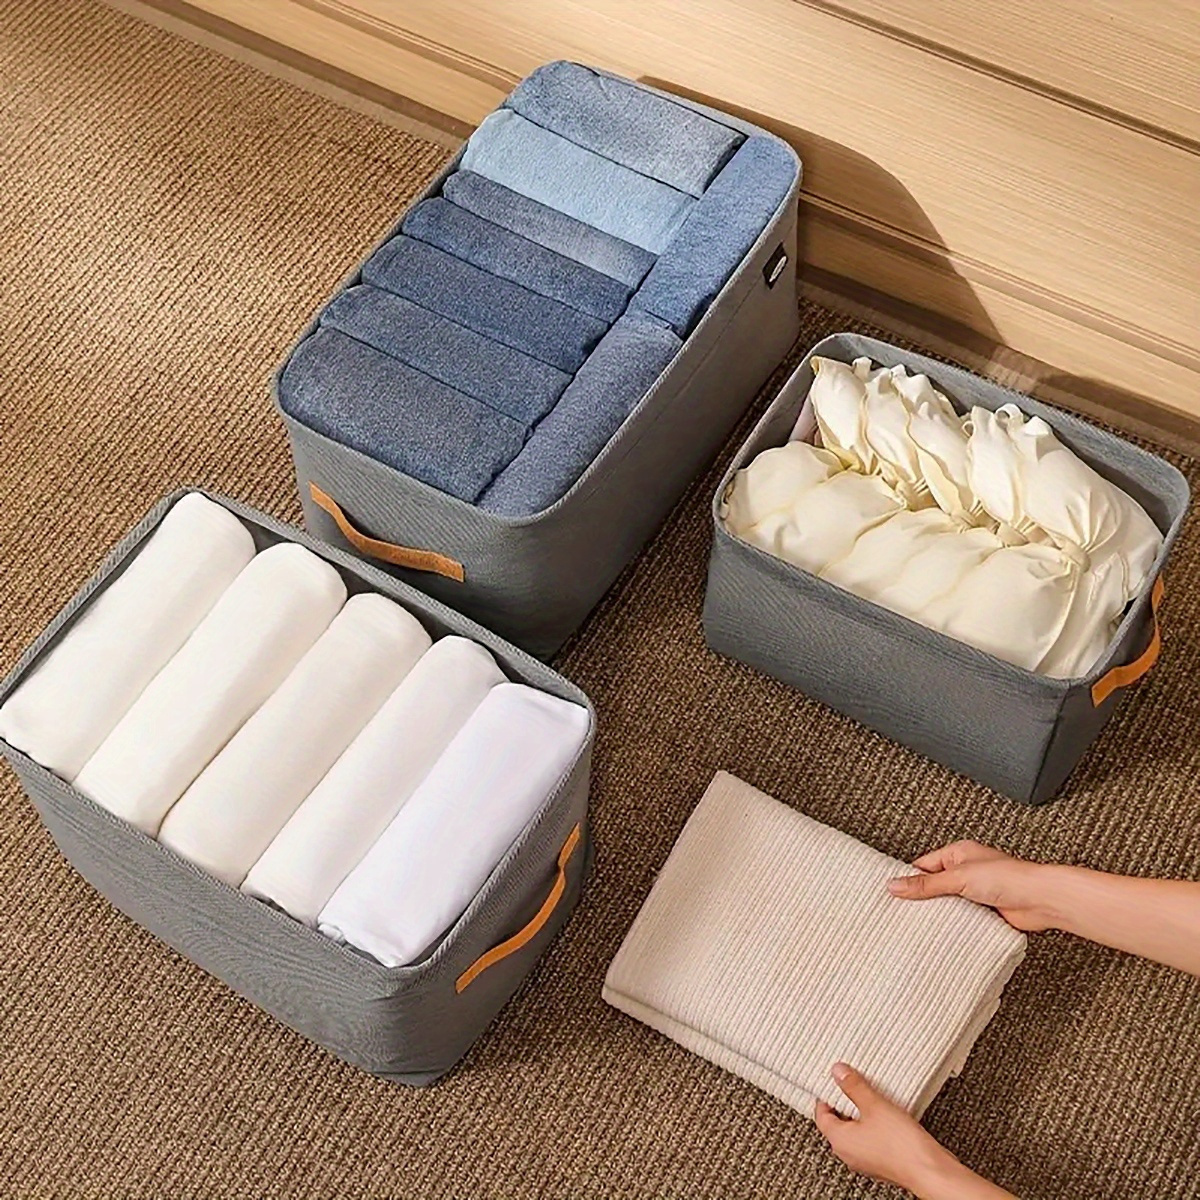 

1pc Wardrobe Clothes Organizer, Closet Organizers And Storage, Clothing Storage Containers For Jeans, Leggings, Skirts, T-shirts, Pants, Foldable Drawer Style Jeans Storage Box, For Bedroom, Dorm Room